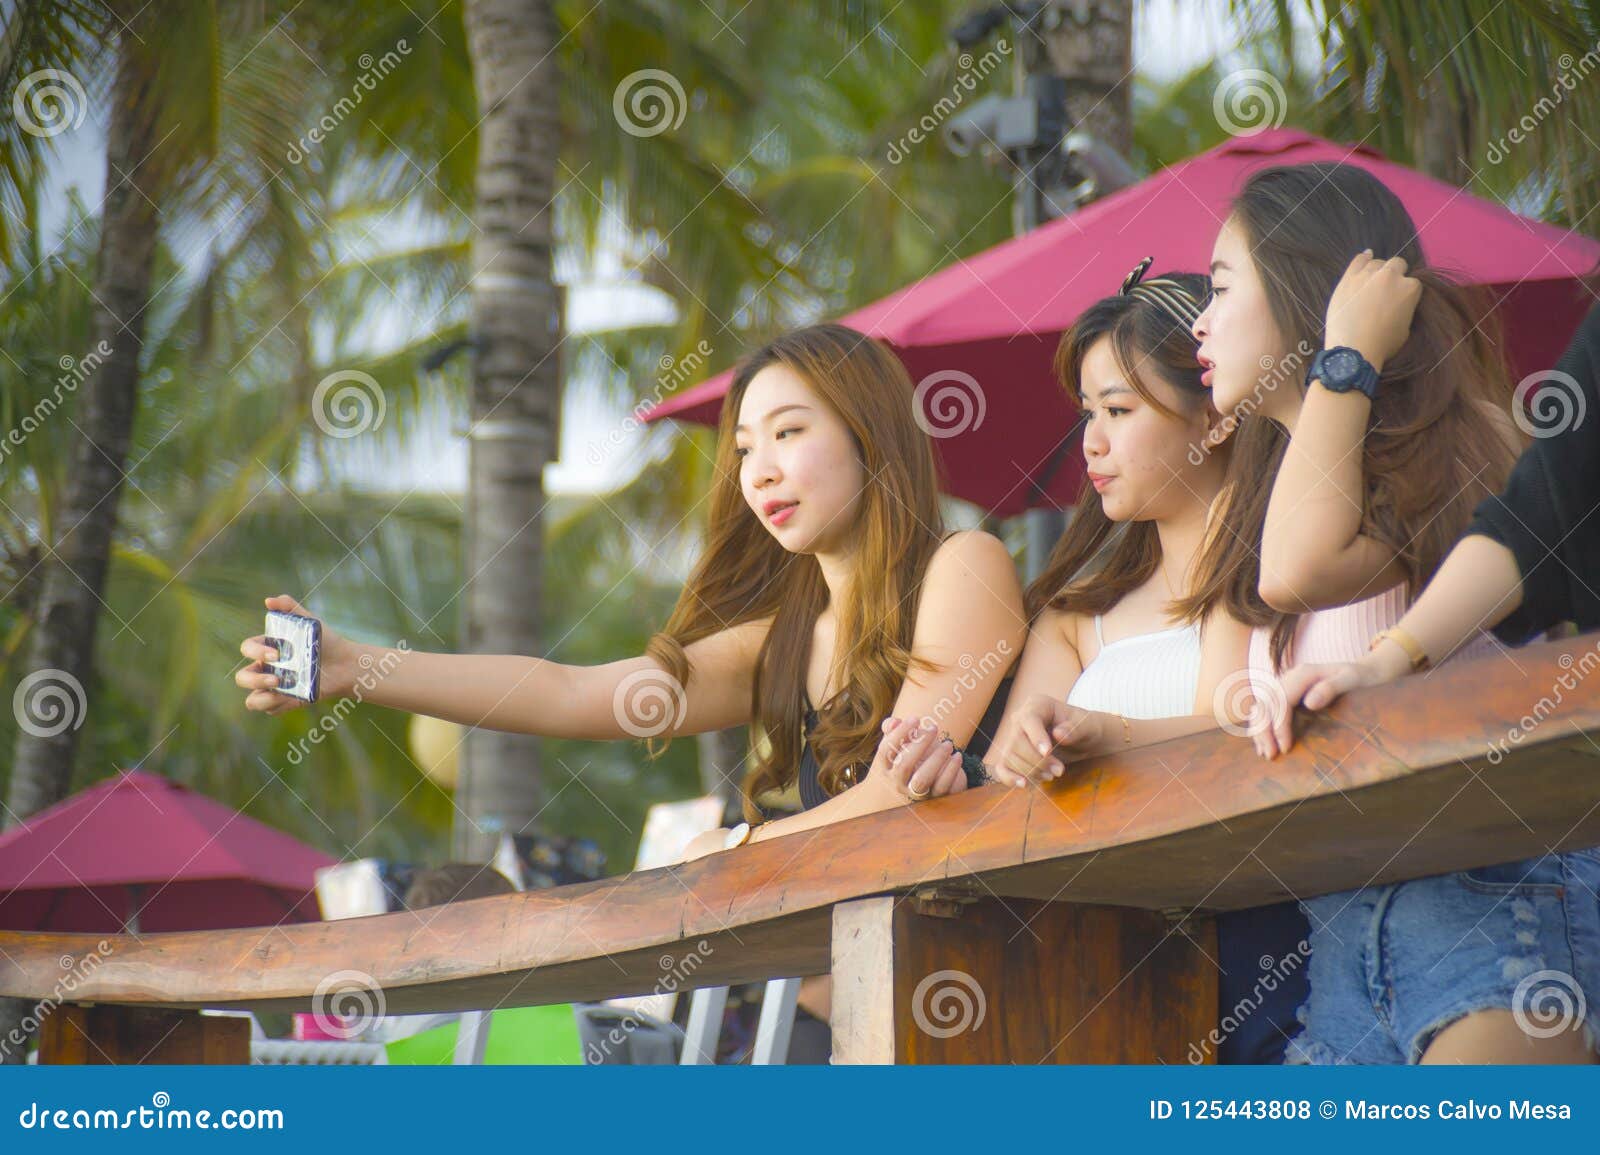 https://thumbs.dreamstime.com/z/lifestyle-portrait-group-young-happy-attractive-asian-chinese-korean-women-hanging-out-girlfriends-enjoying-125443808.jpg